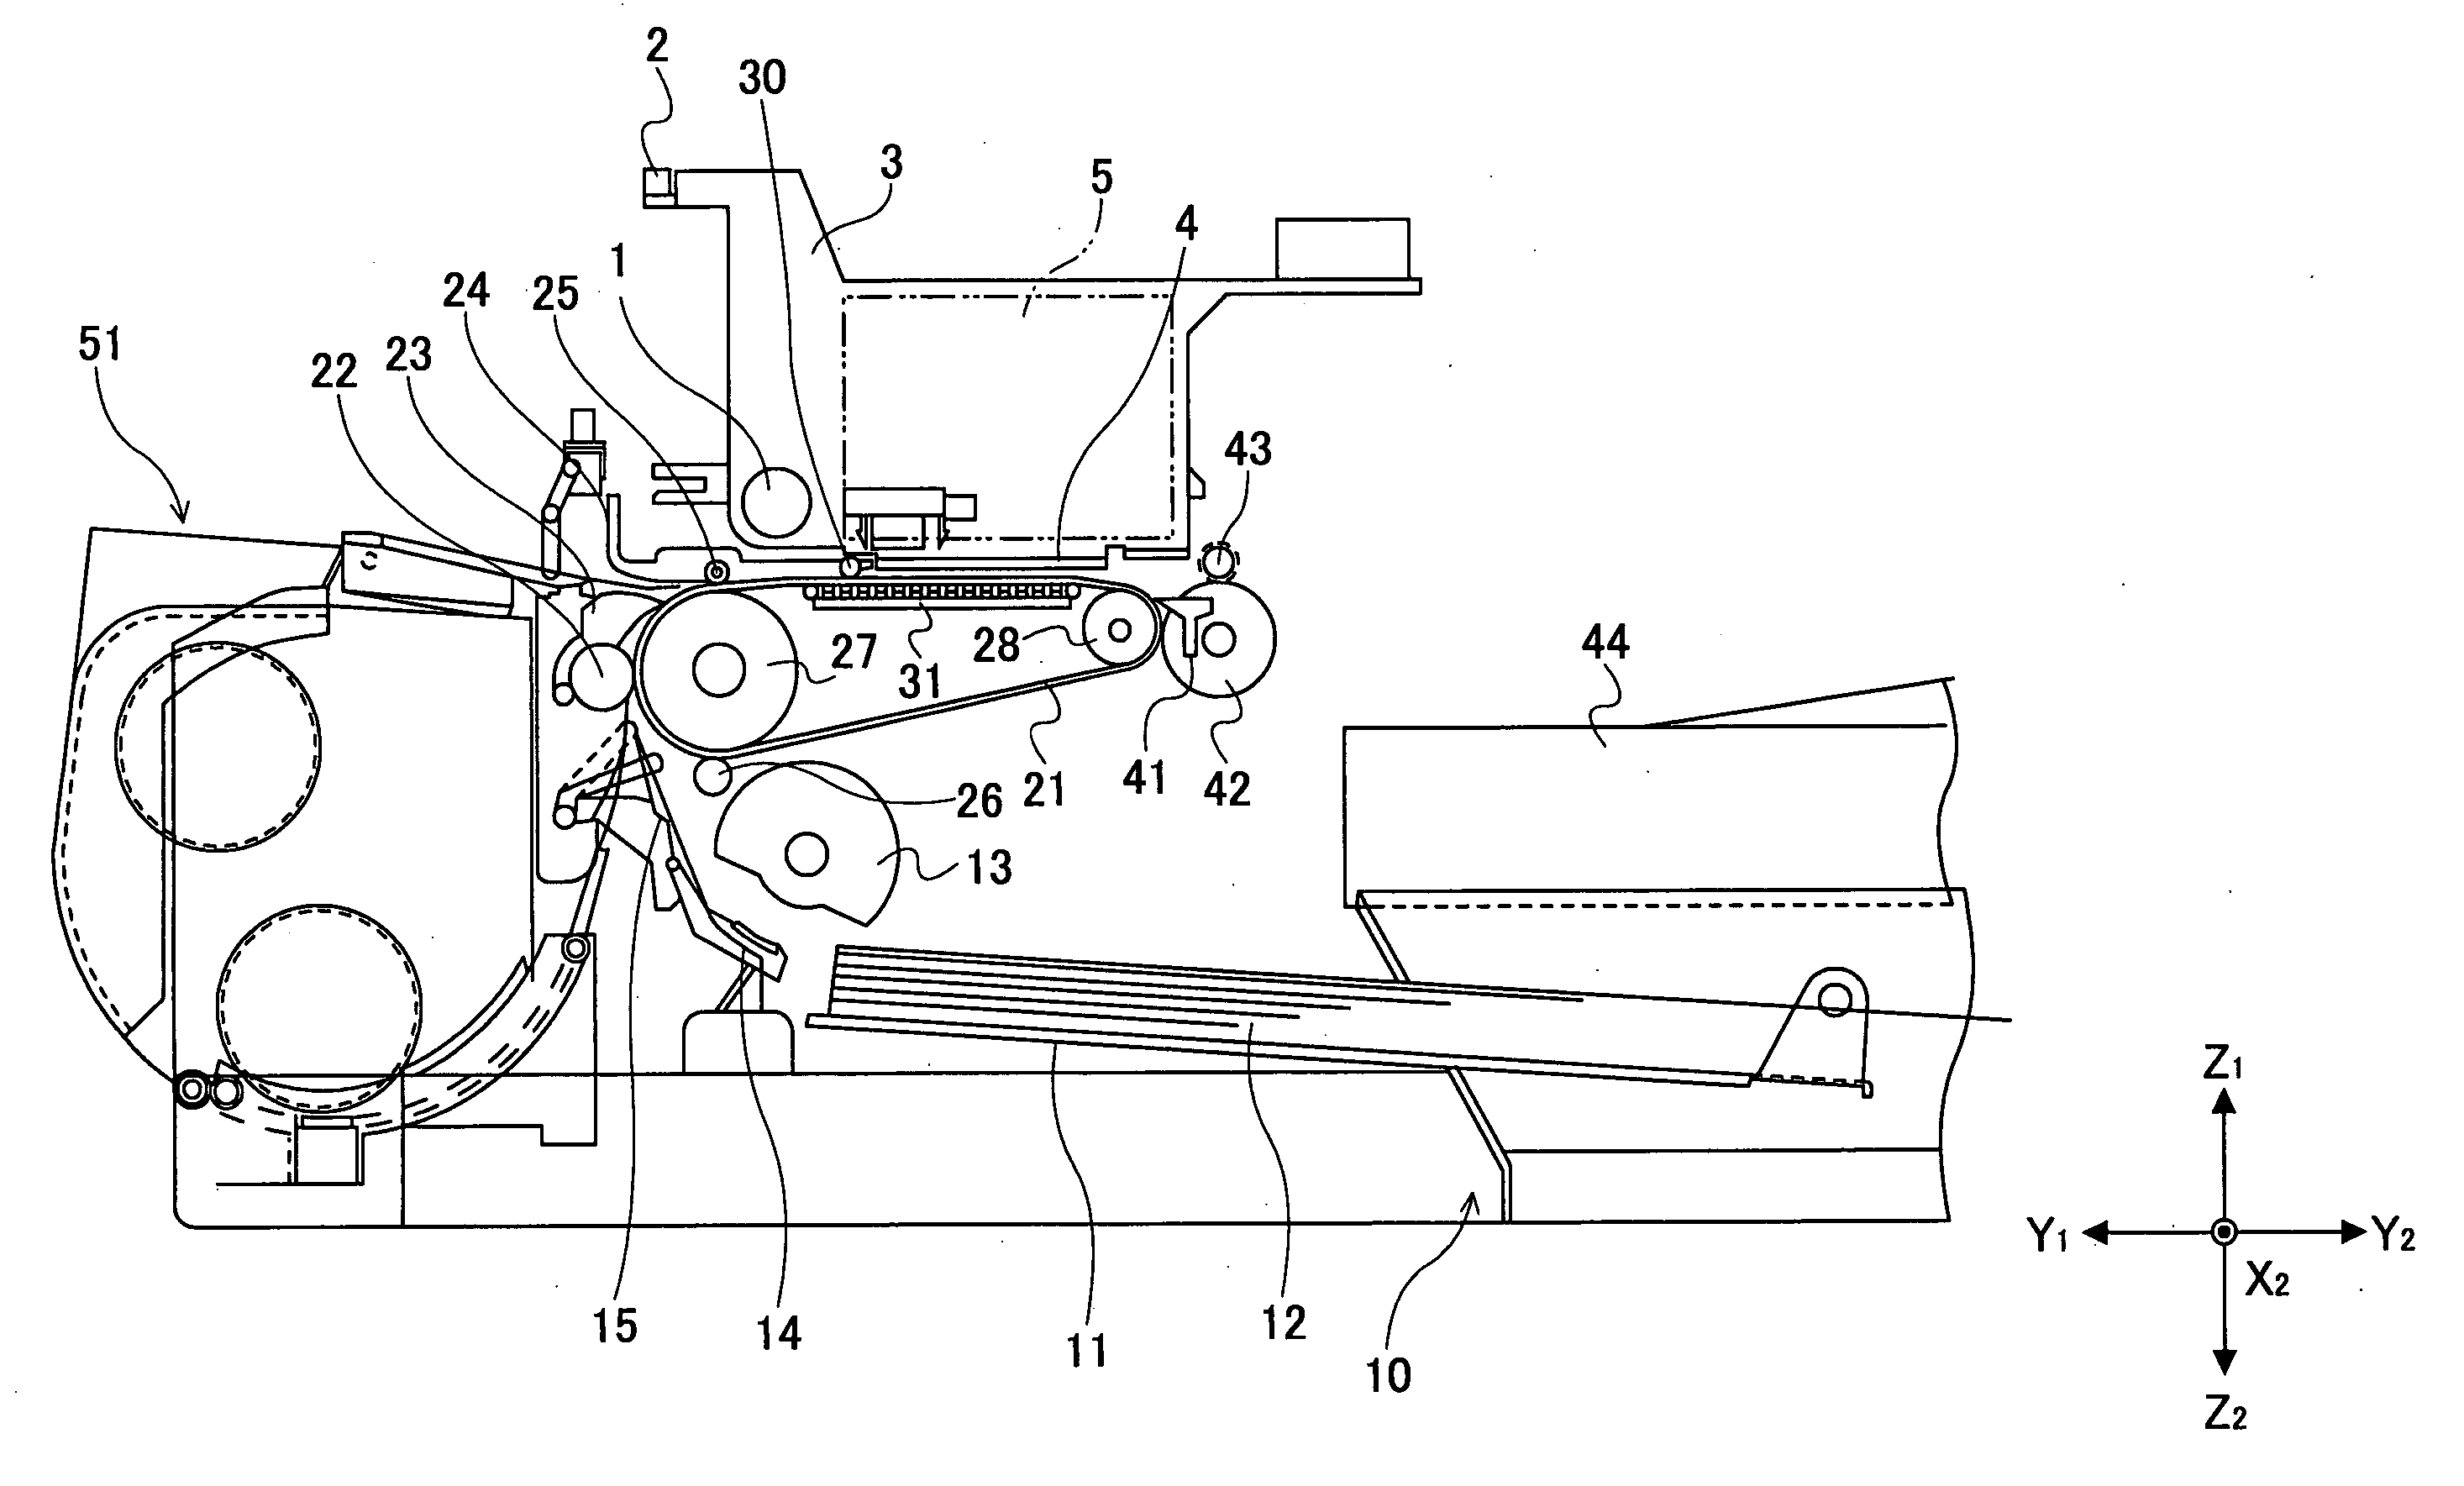 Stably operable image-forming apparatus with improved paper conveying and ejecting mechanism